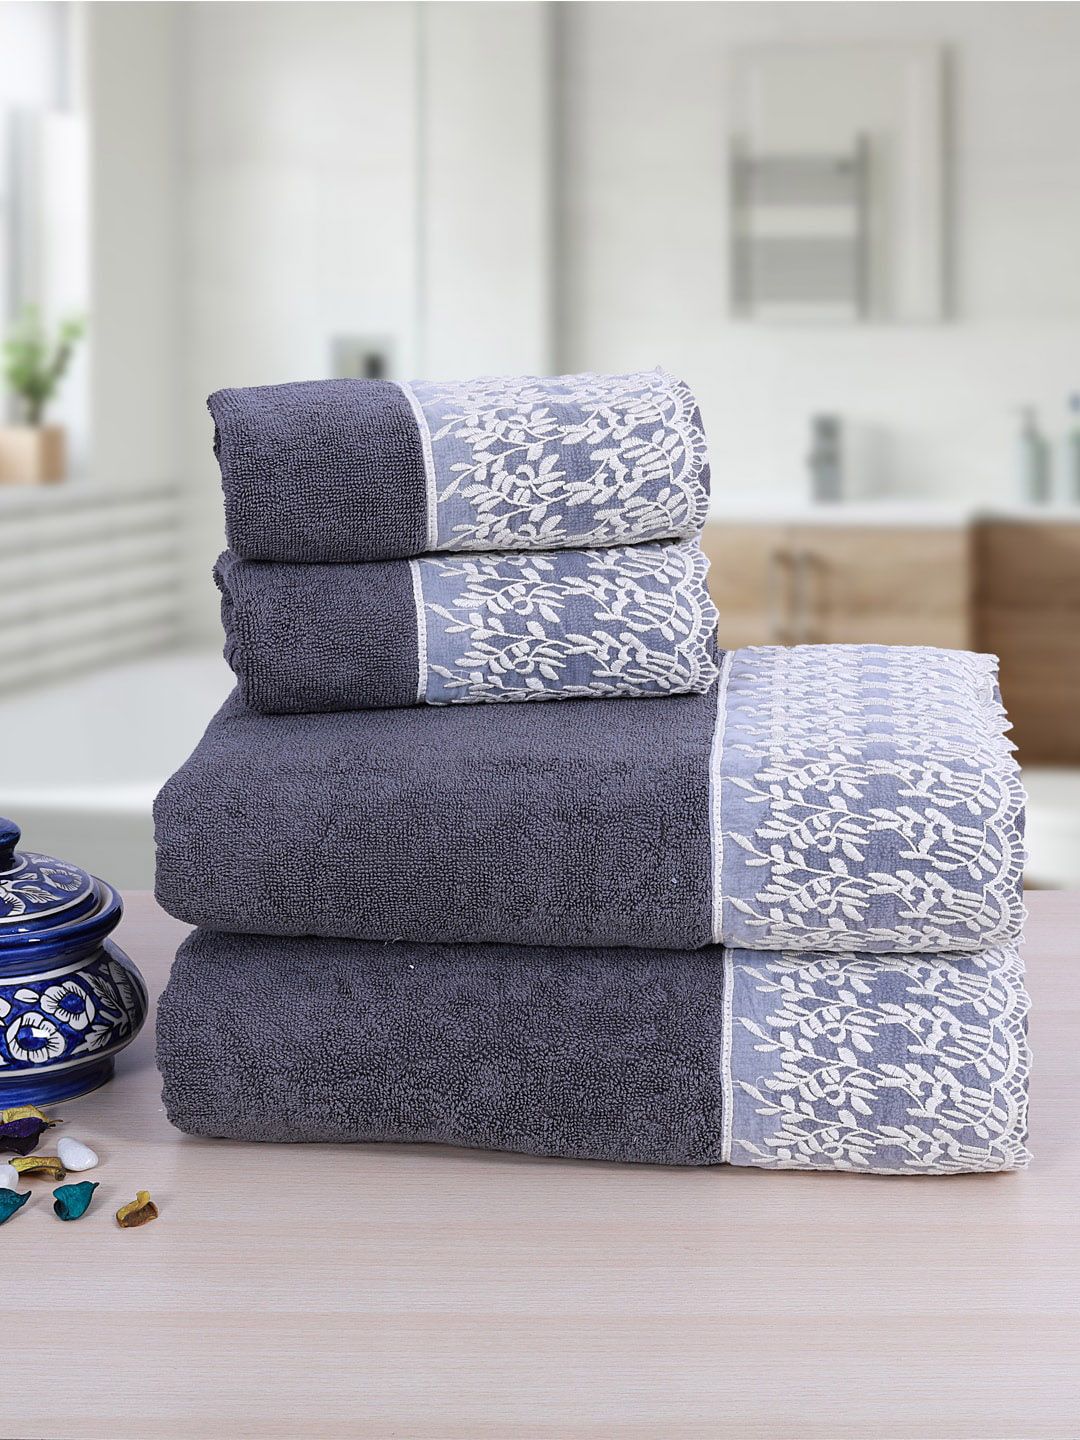 RANGOLI Set Of 4 Charcoal Grey & White Embroidered 550 GSM Towels Price in India